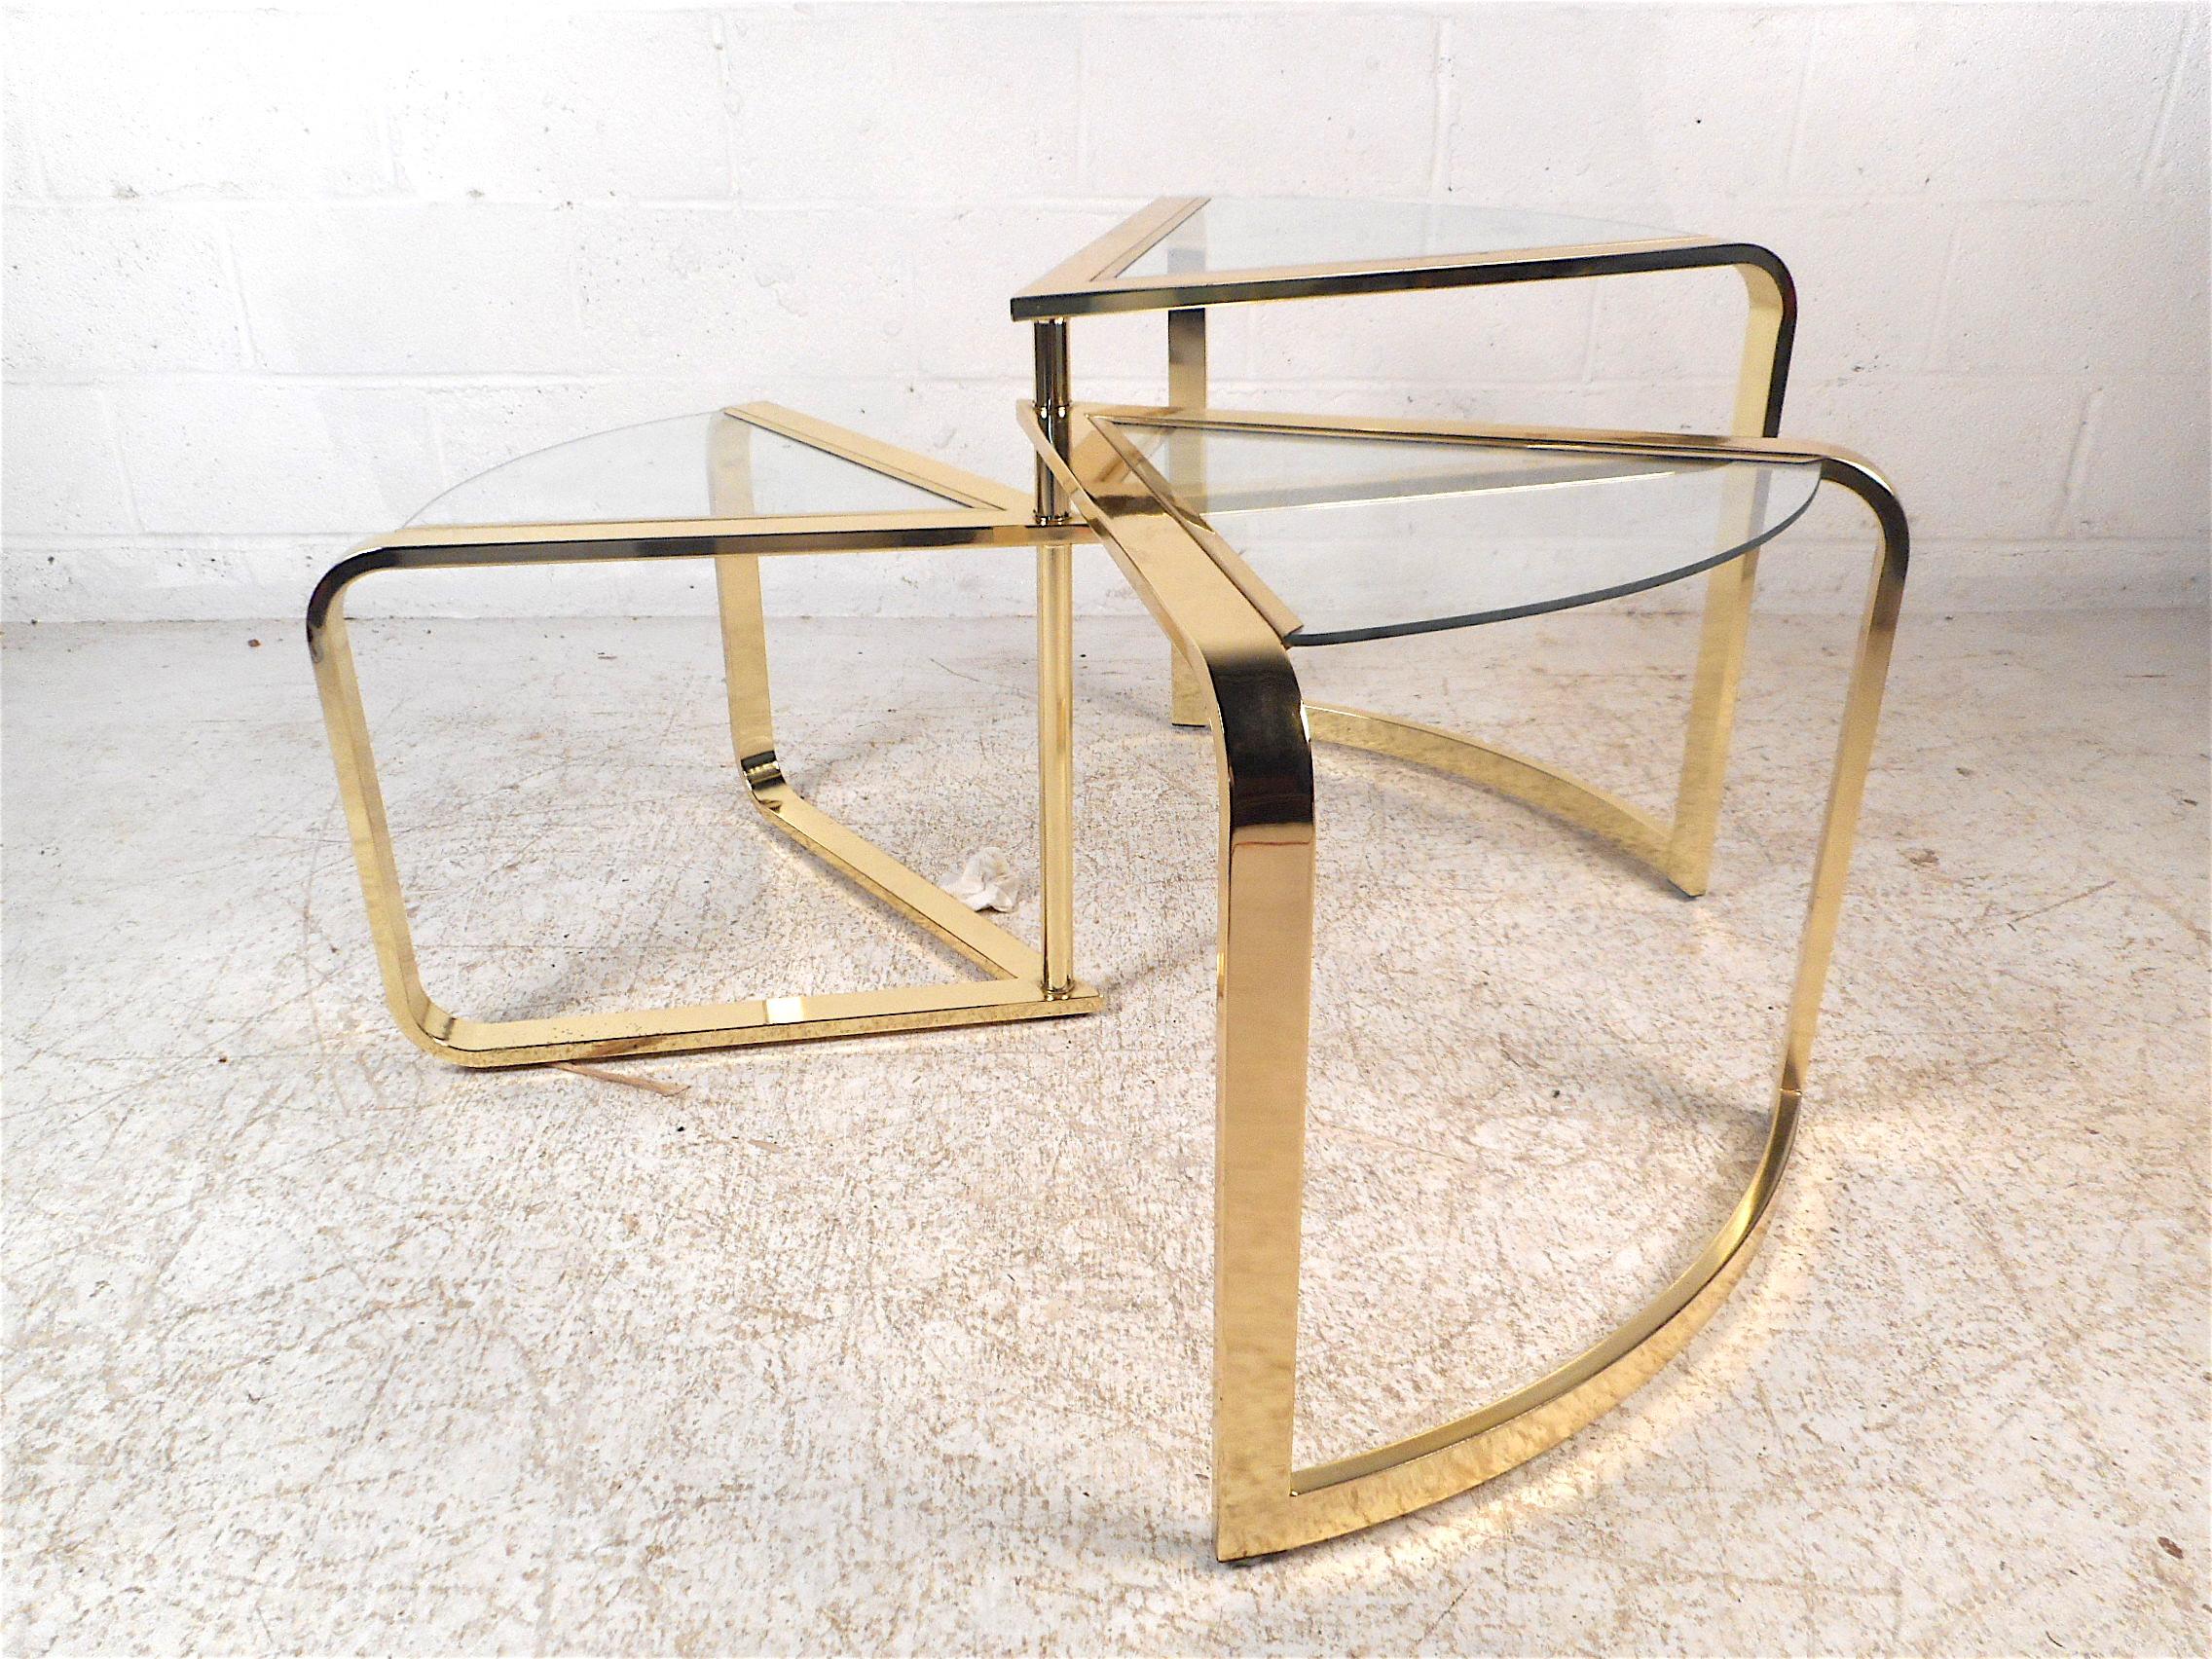 Stylish midcentury three-tiered swiveling coffee/cocktail table. Sleek and sturdy brass frame, three glass inserts in each tier serve as table surfaces. A unique addition to any modern interior. Please confirm item location with dealer (NJ or NY).